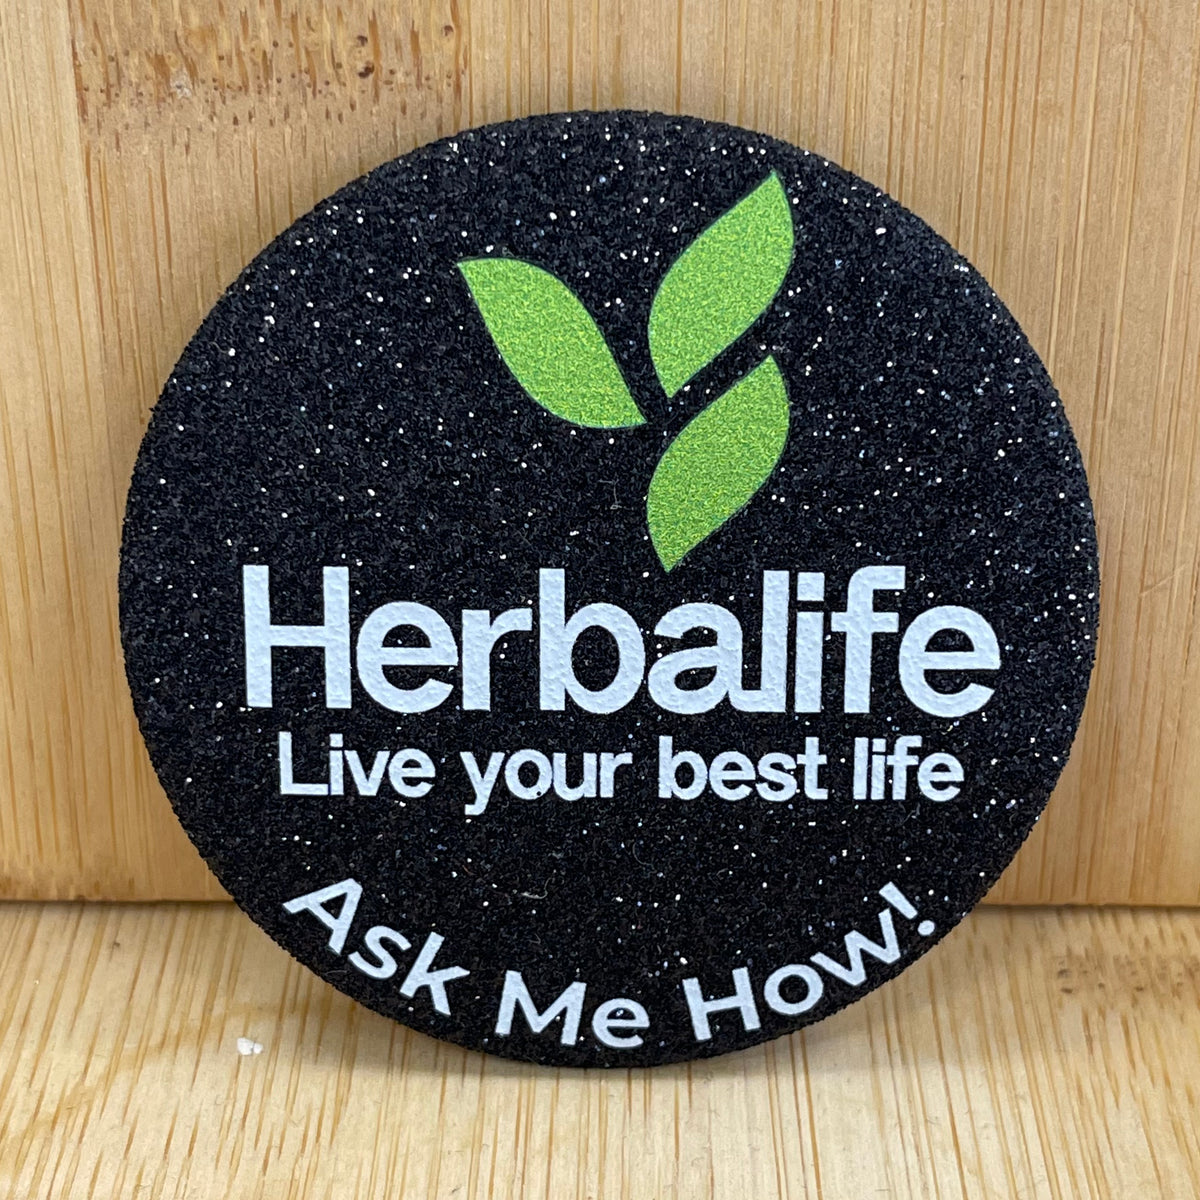 Sparkly Badge - Herbalife 2.0 Live your best life – WearTheBrand